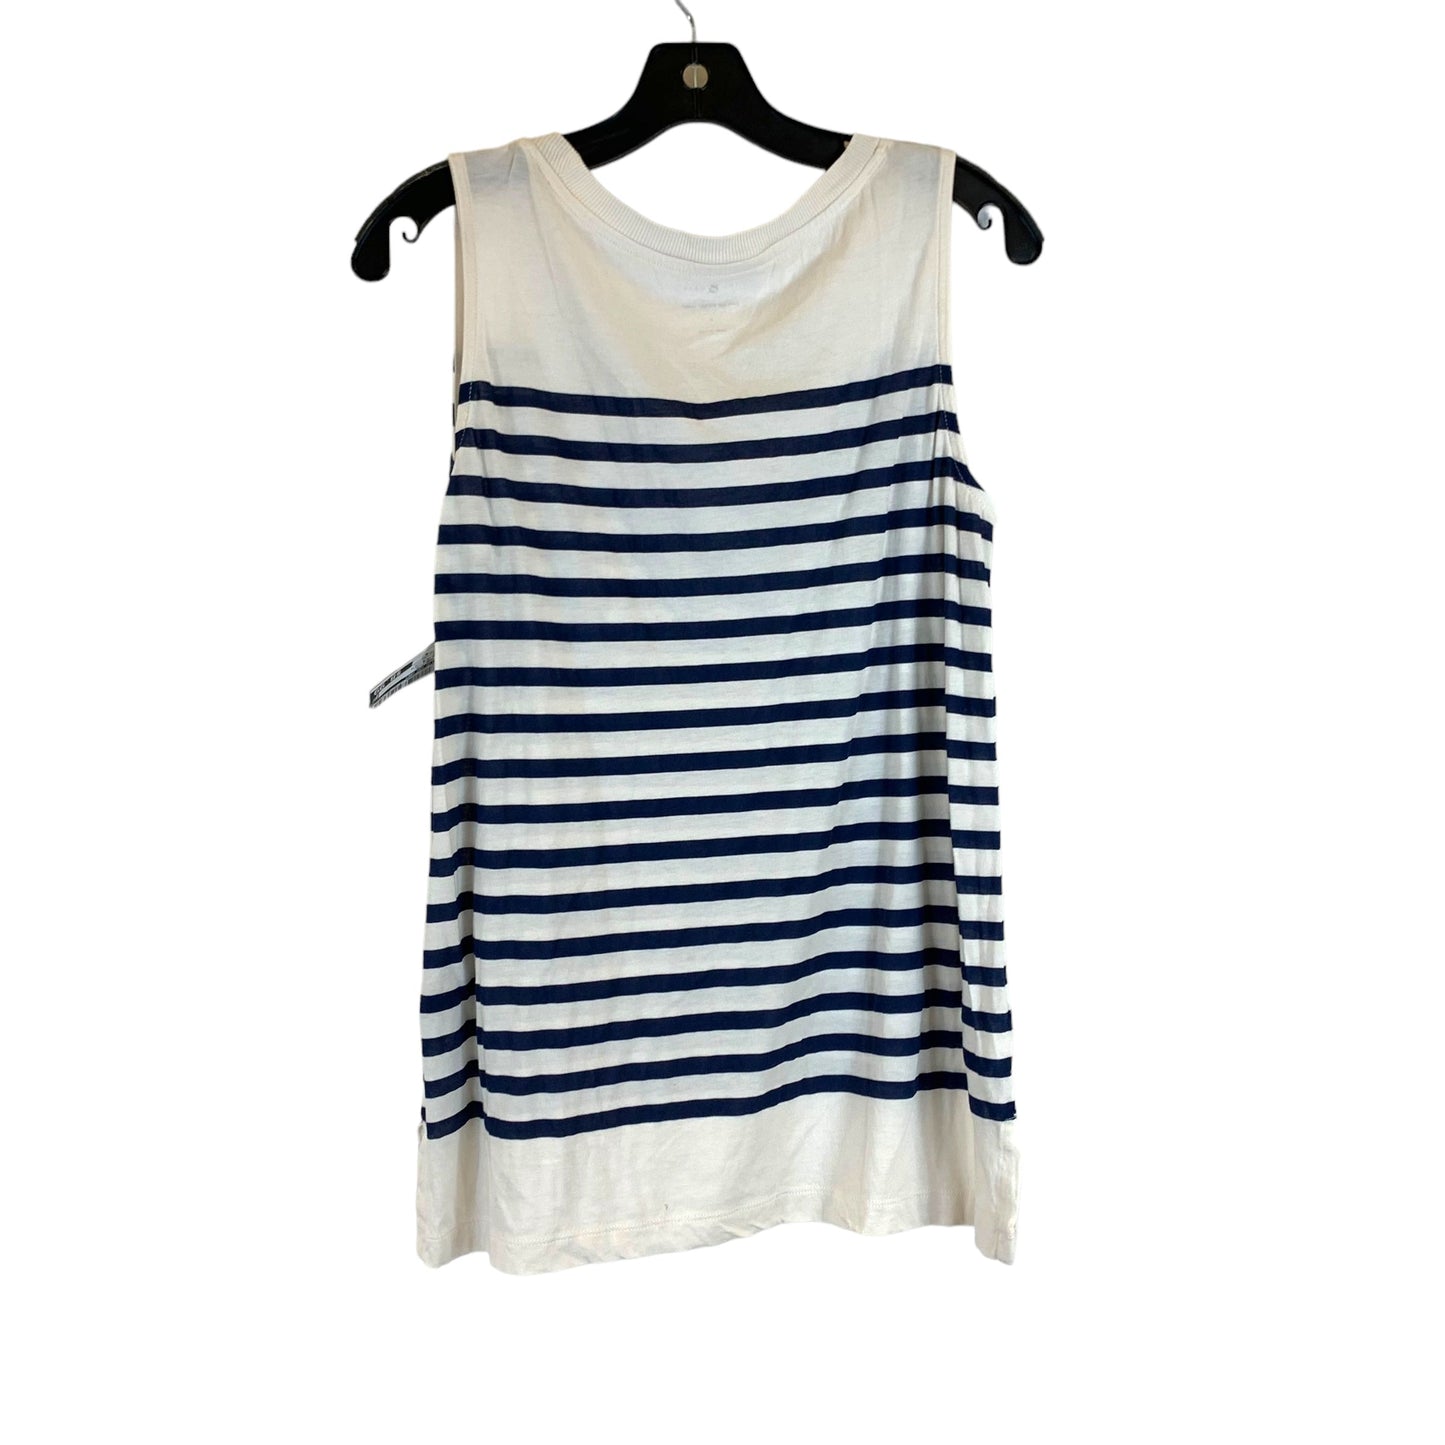 Blue & White Tank Top Lou And Grey, Size M